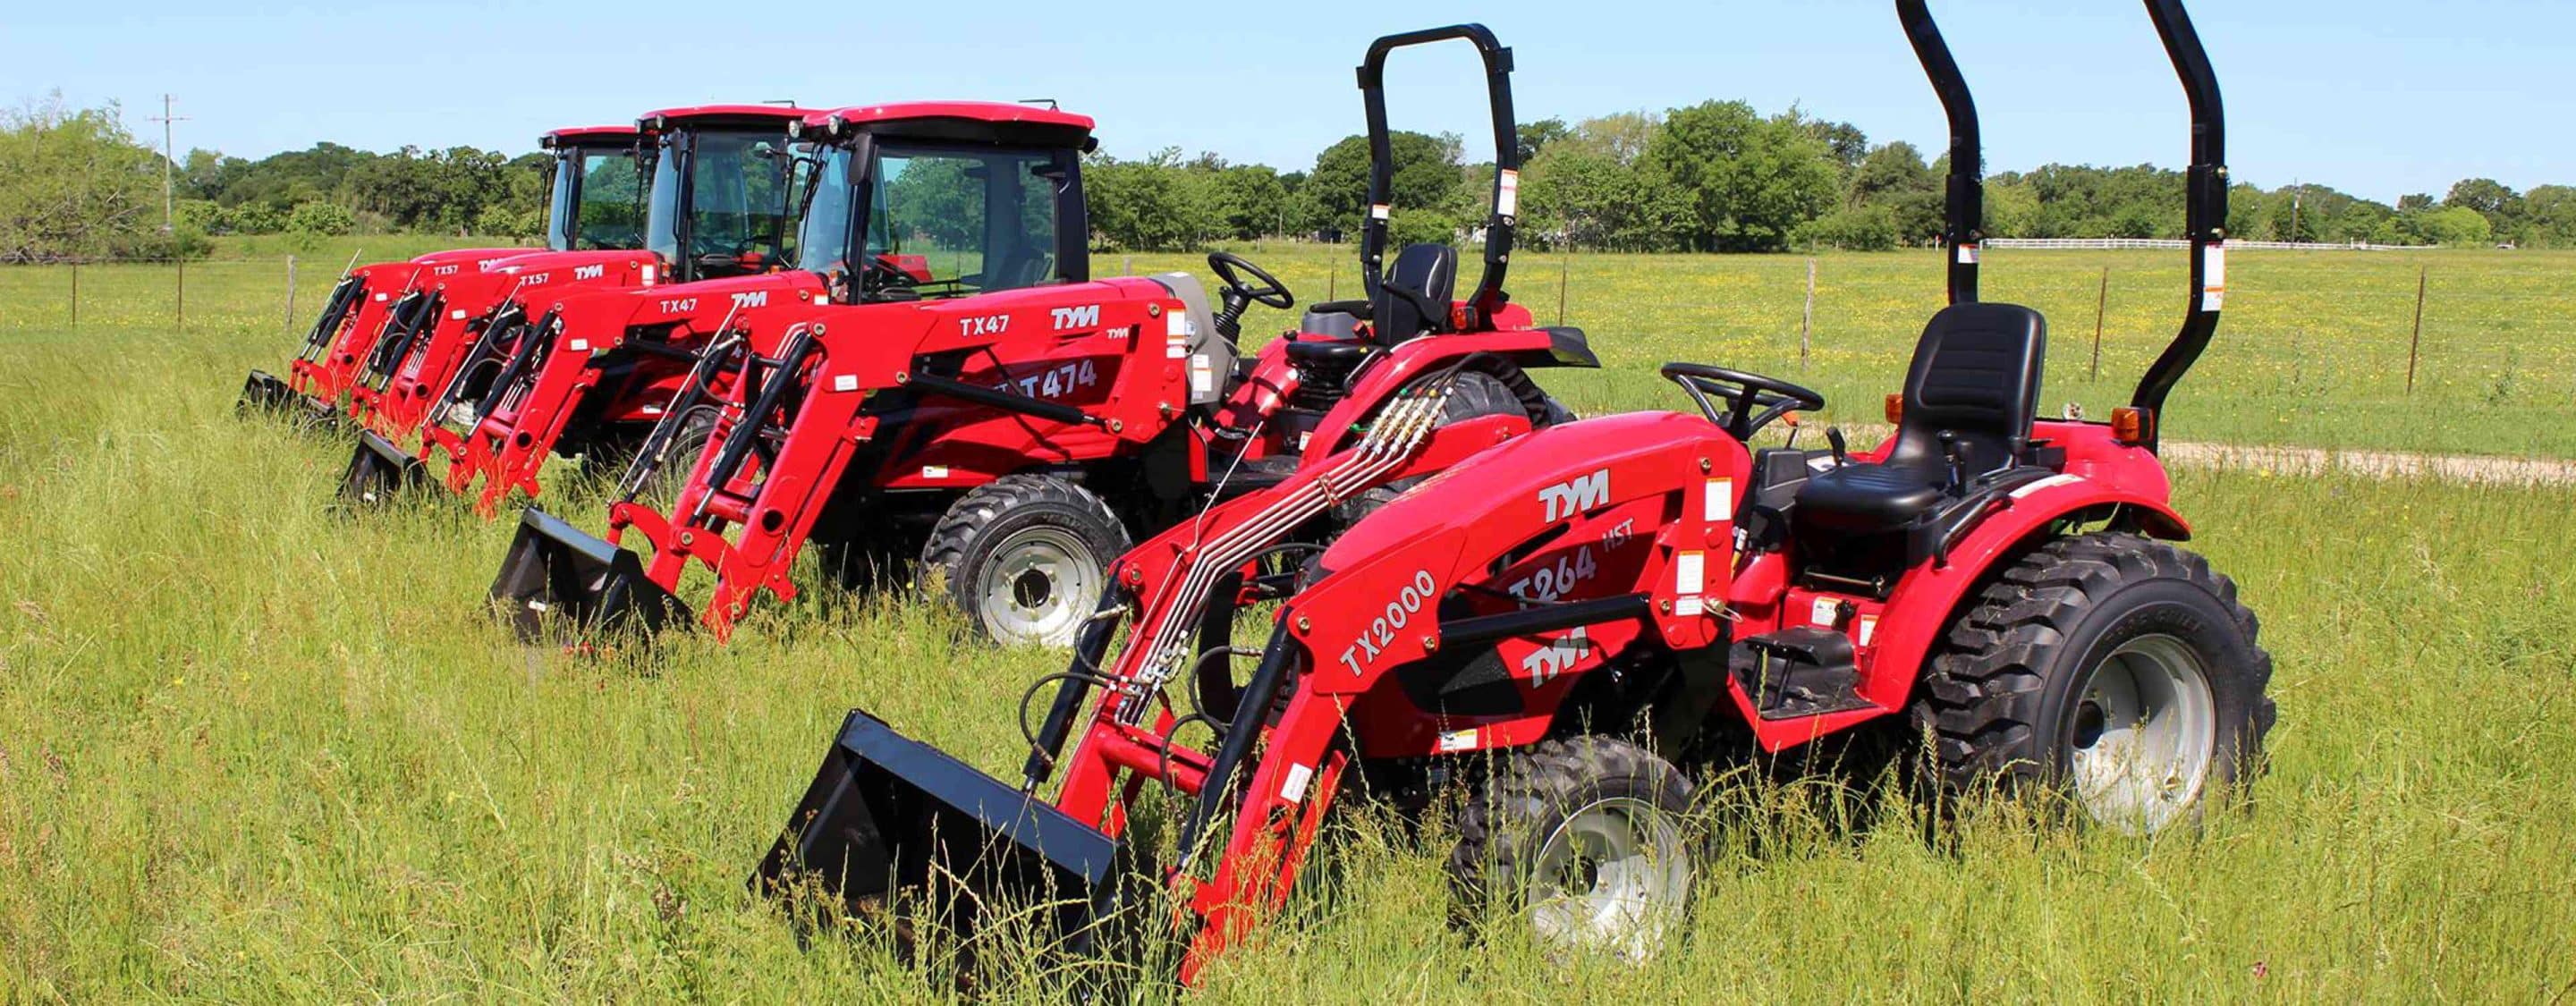 TYM compact tractors 